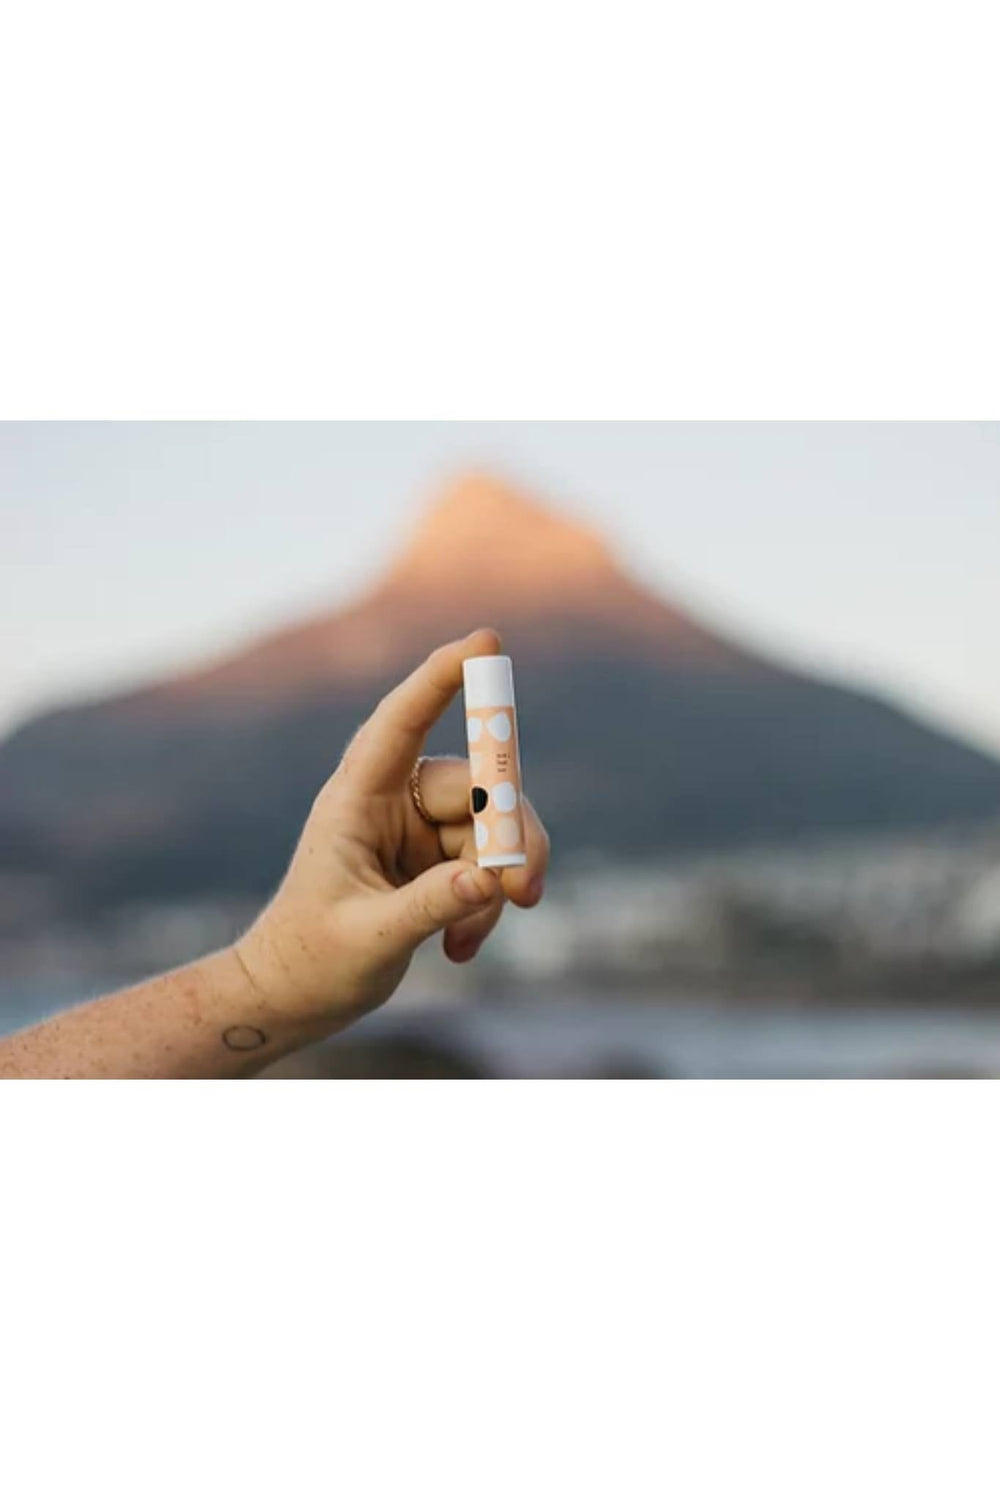 Essential Oil Lip Balm by 2nd Story Goods